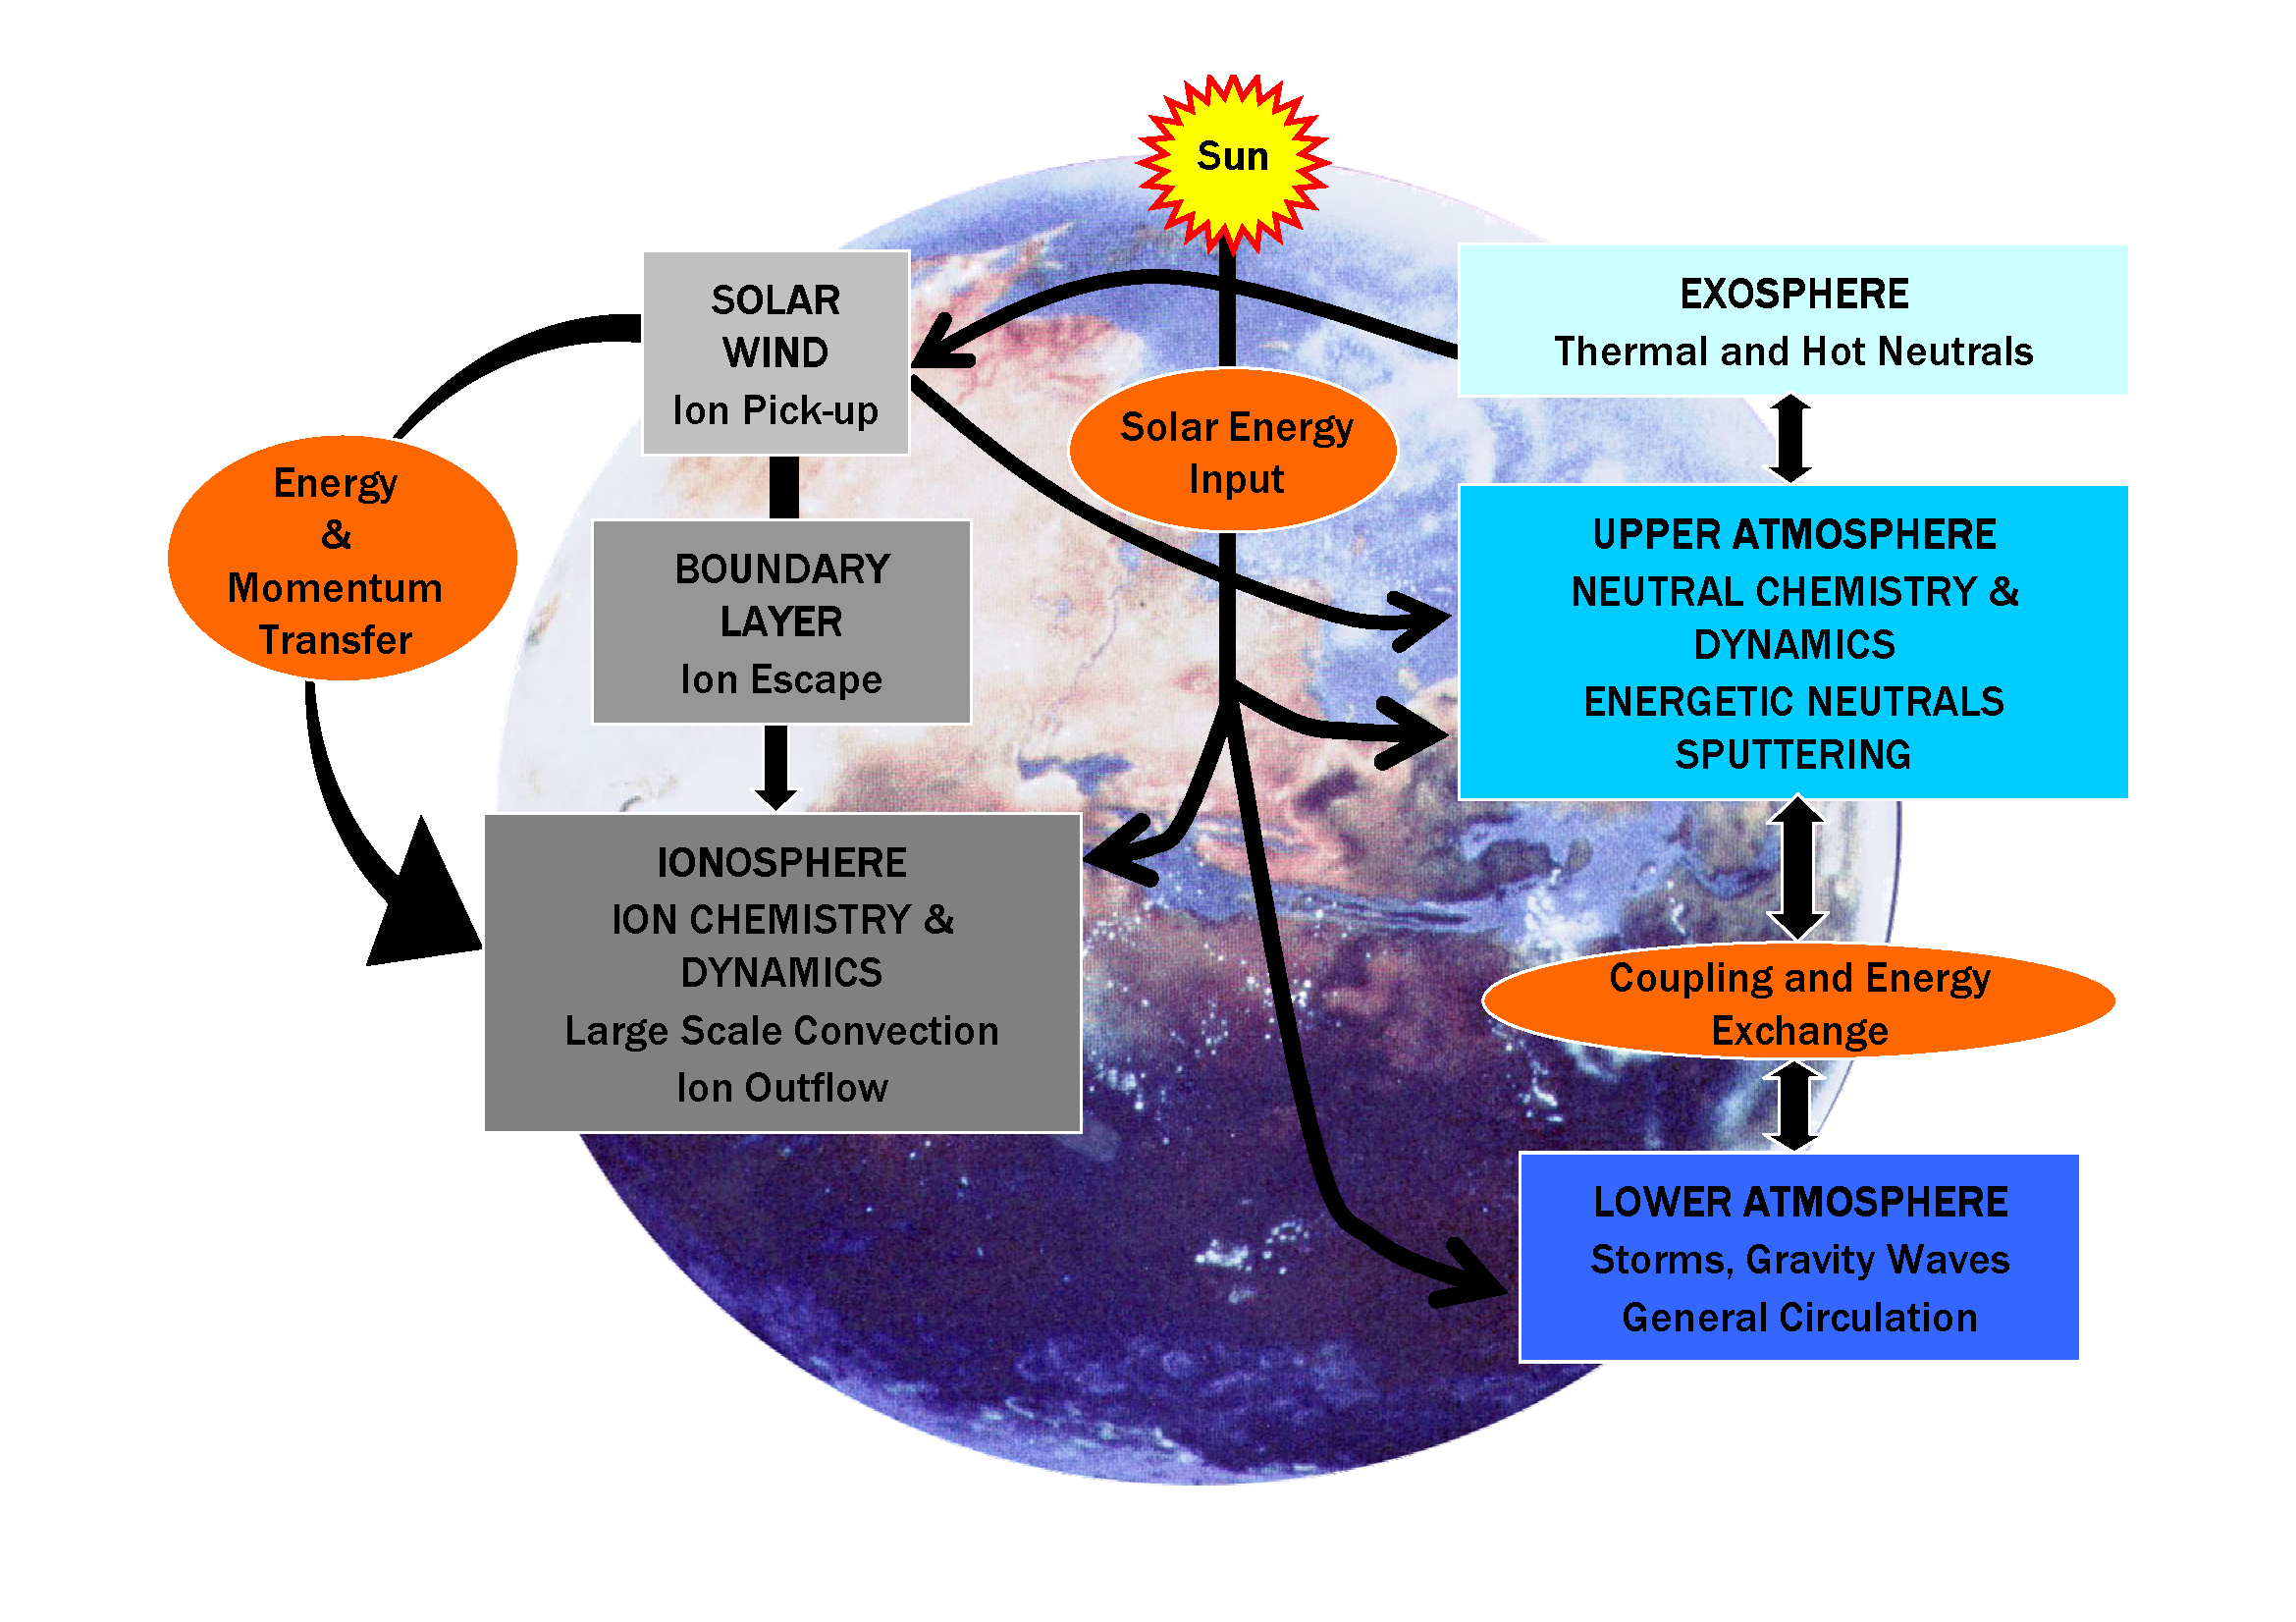 Mars's environment and coupling